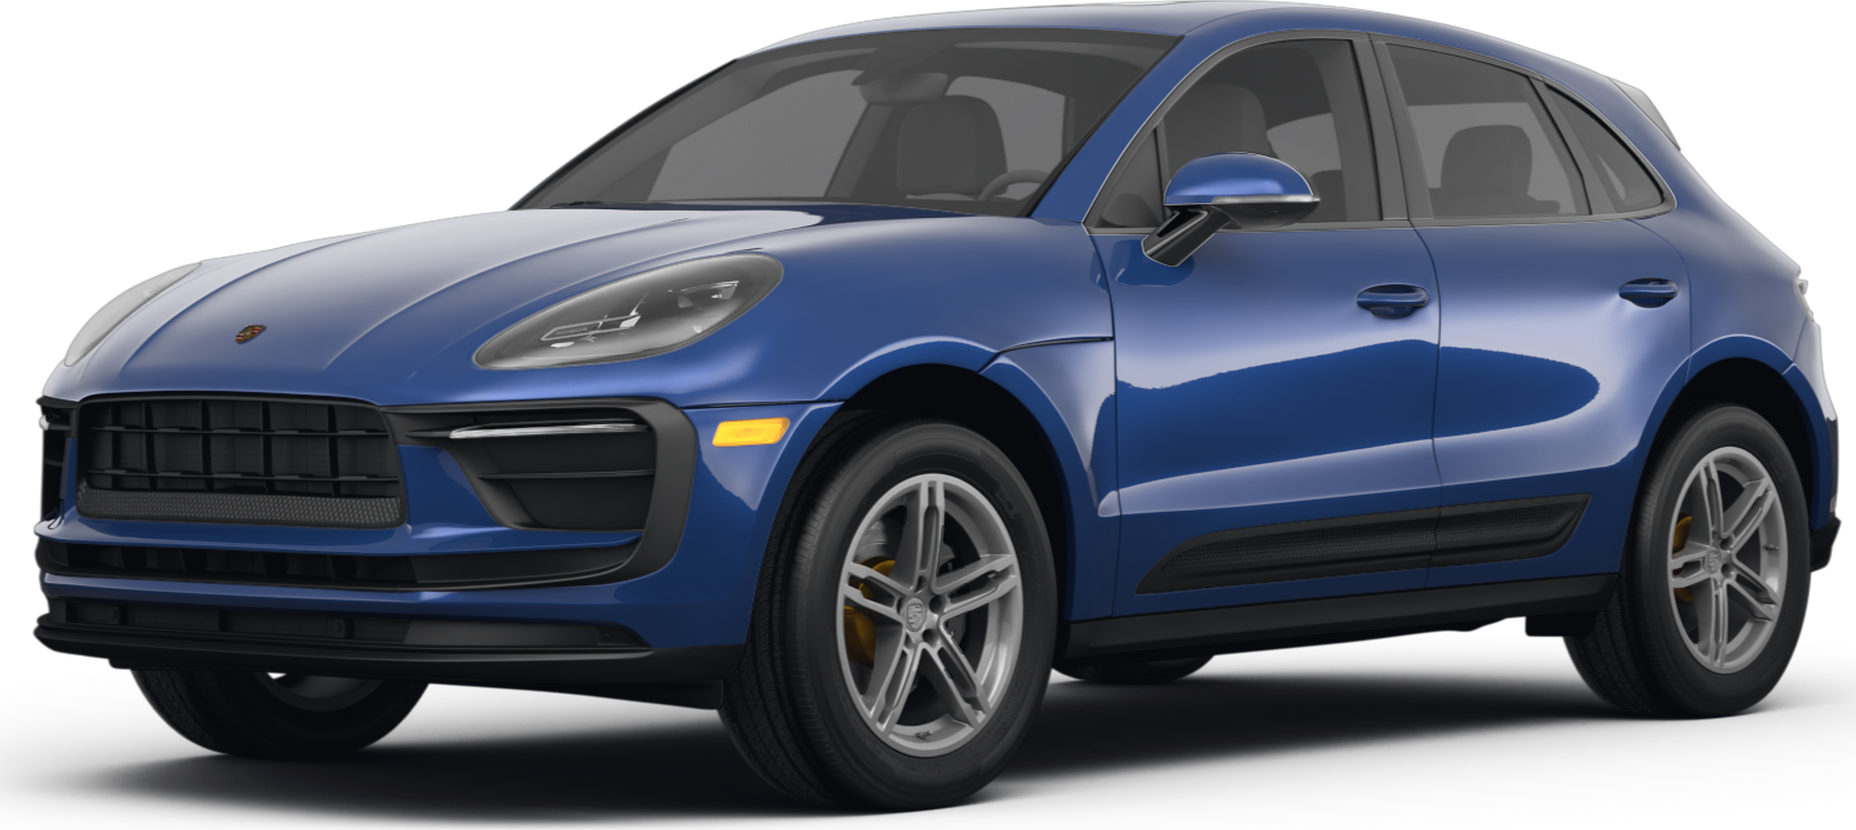 https://file.kelleybluebookimages.com/kbb/base/evox/CP/50663/2024-Porsche-Macan-front_50663_032_1856x830_1A_cropped.png